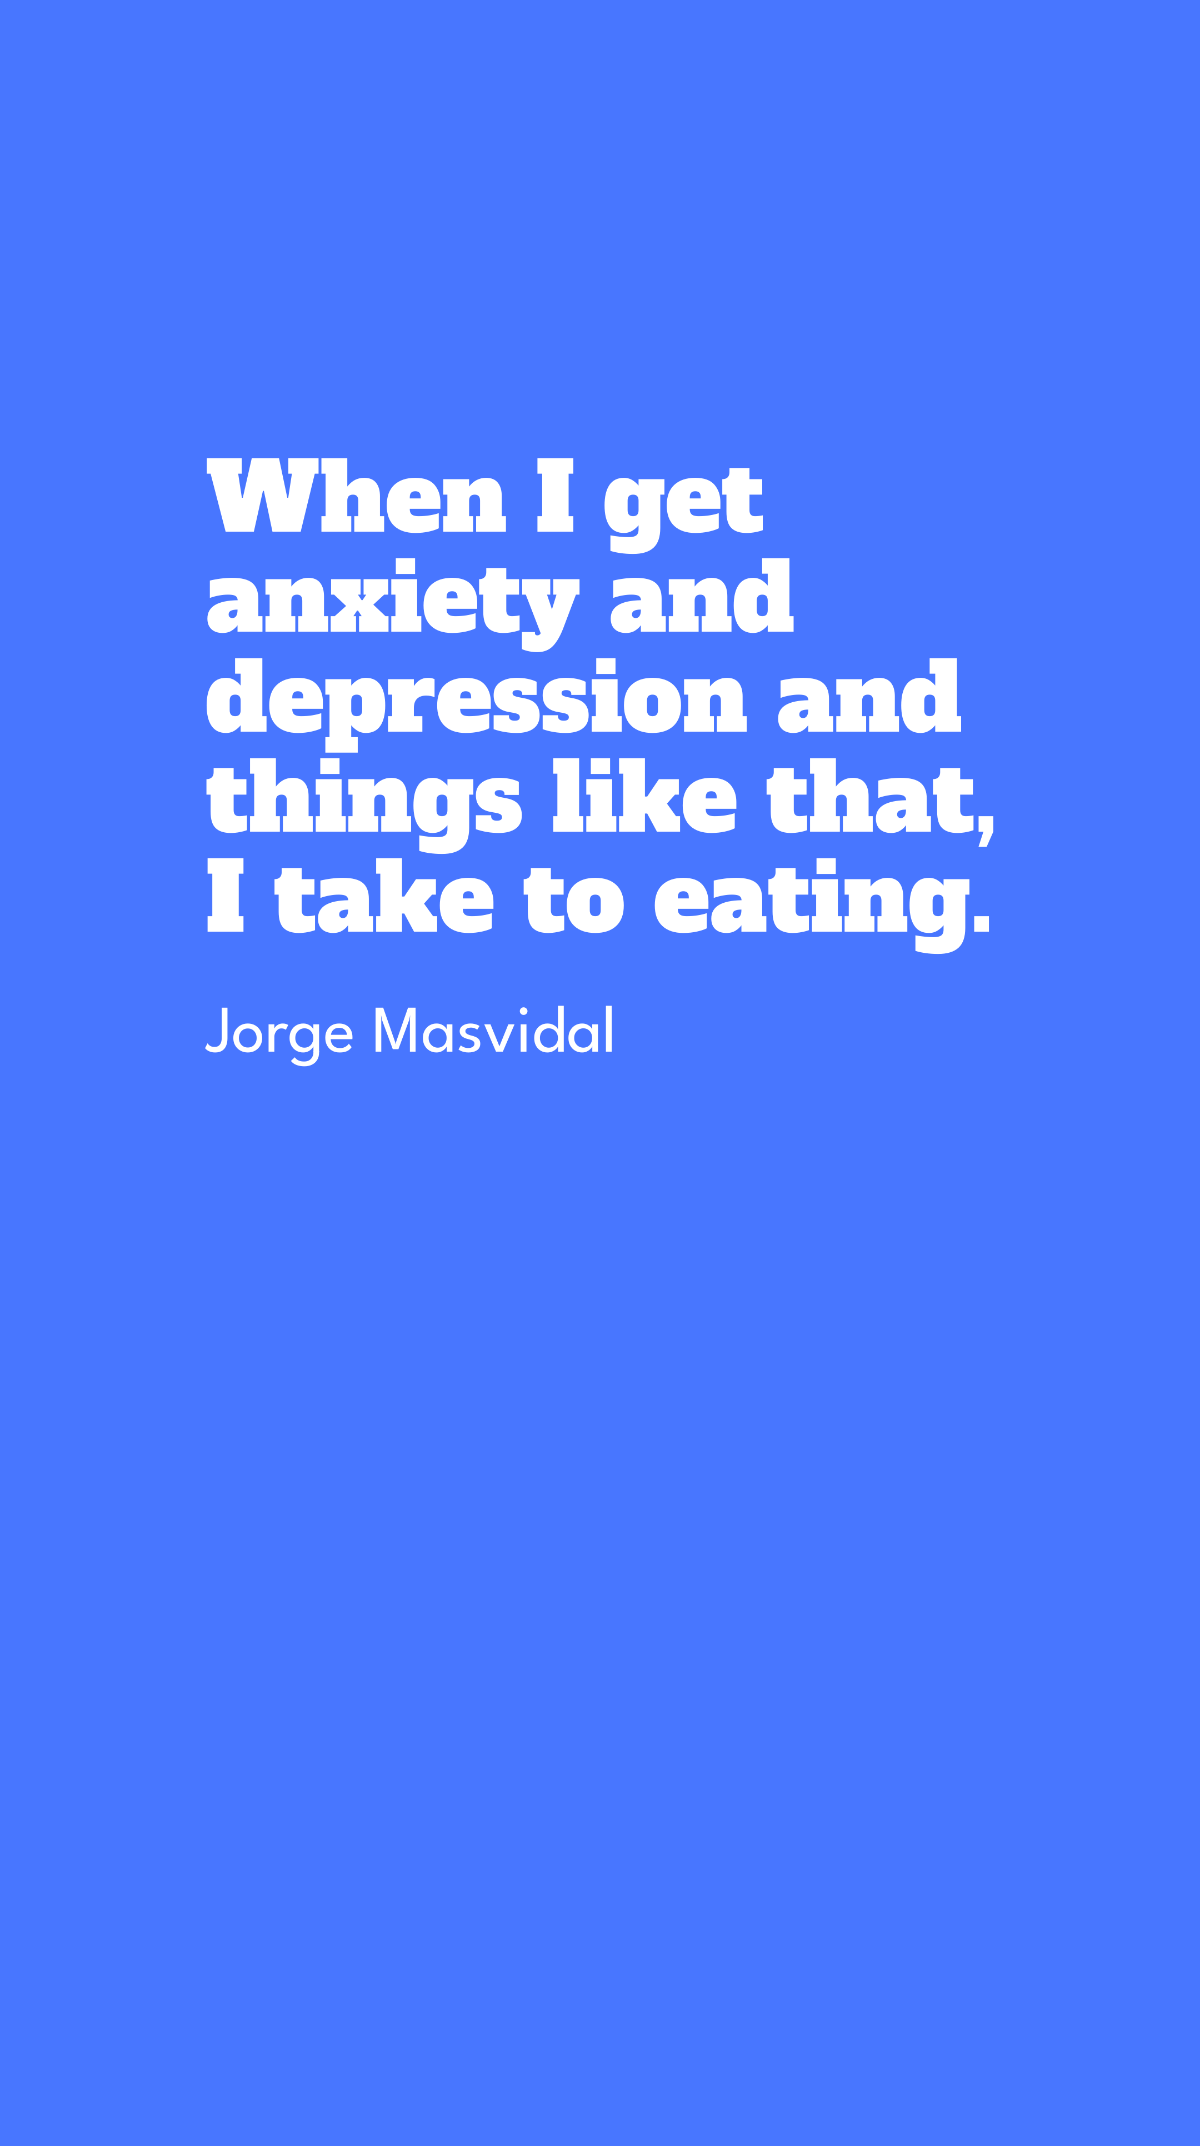 Jorge Masvidal - When I get anxiety and depression and things like that, I take to eating. Template